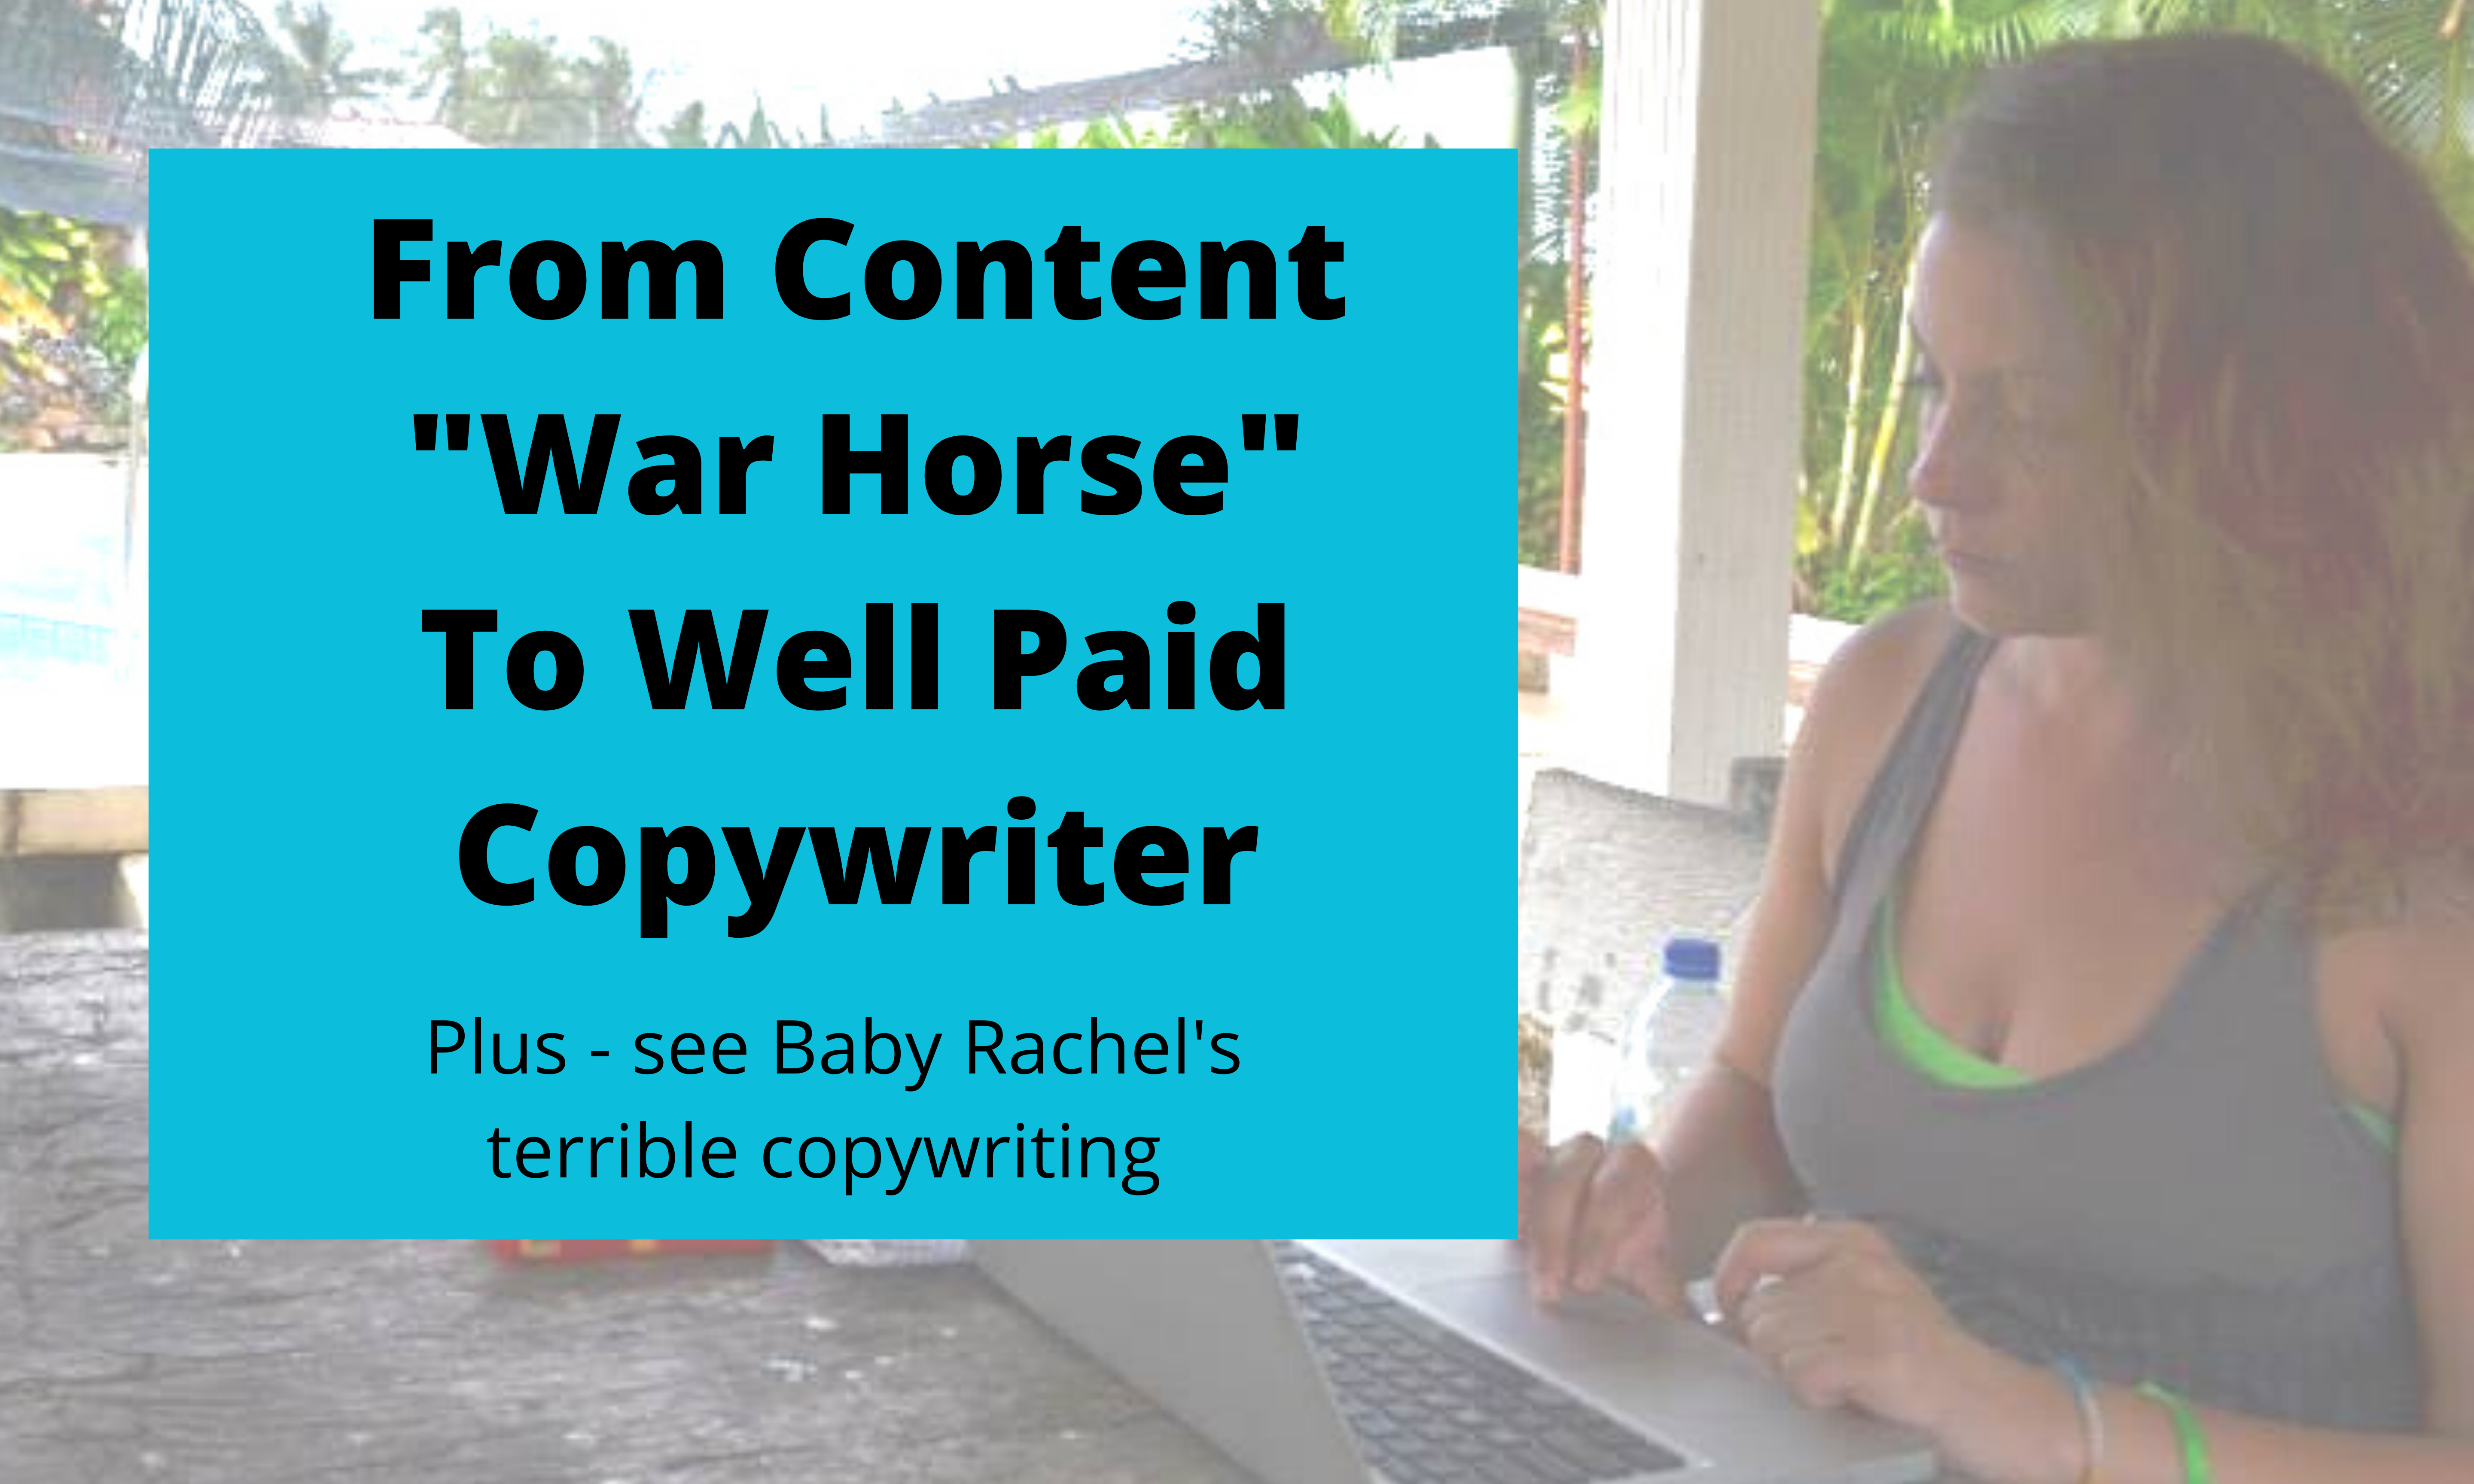 Making The Leap From “Content” To “Copywriting”